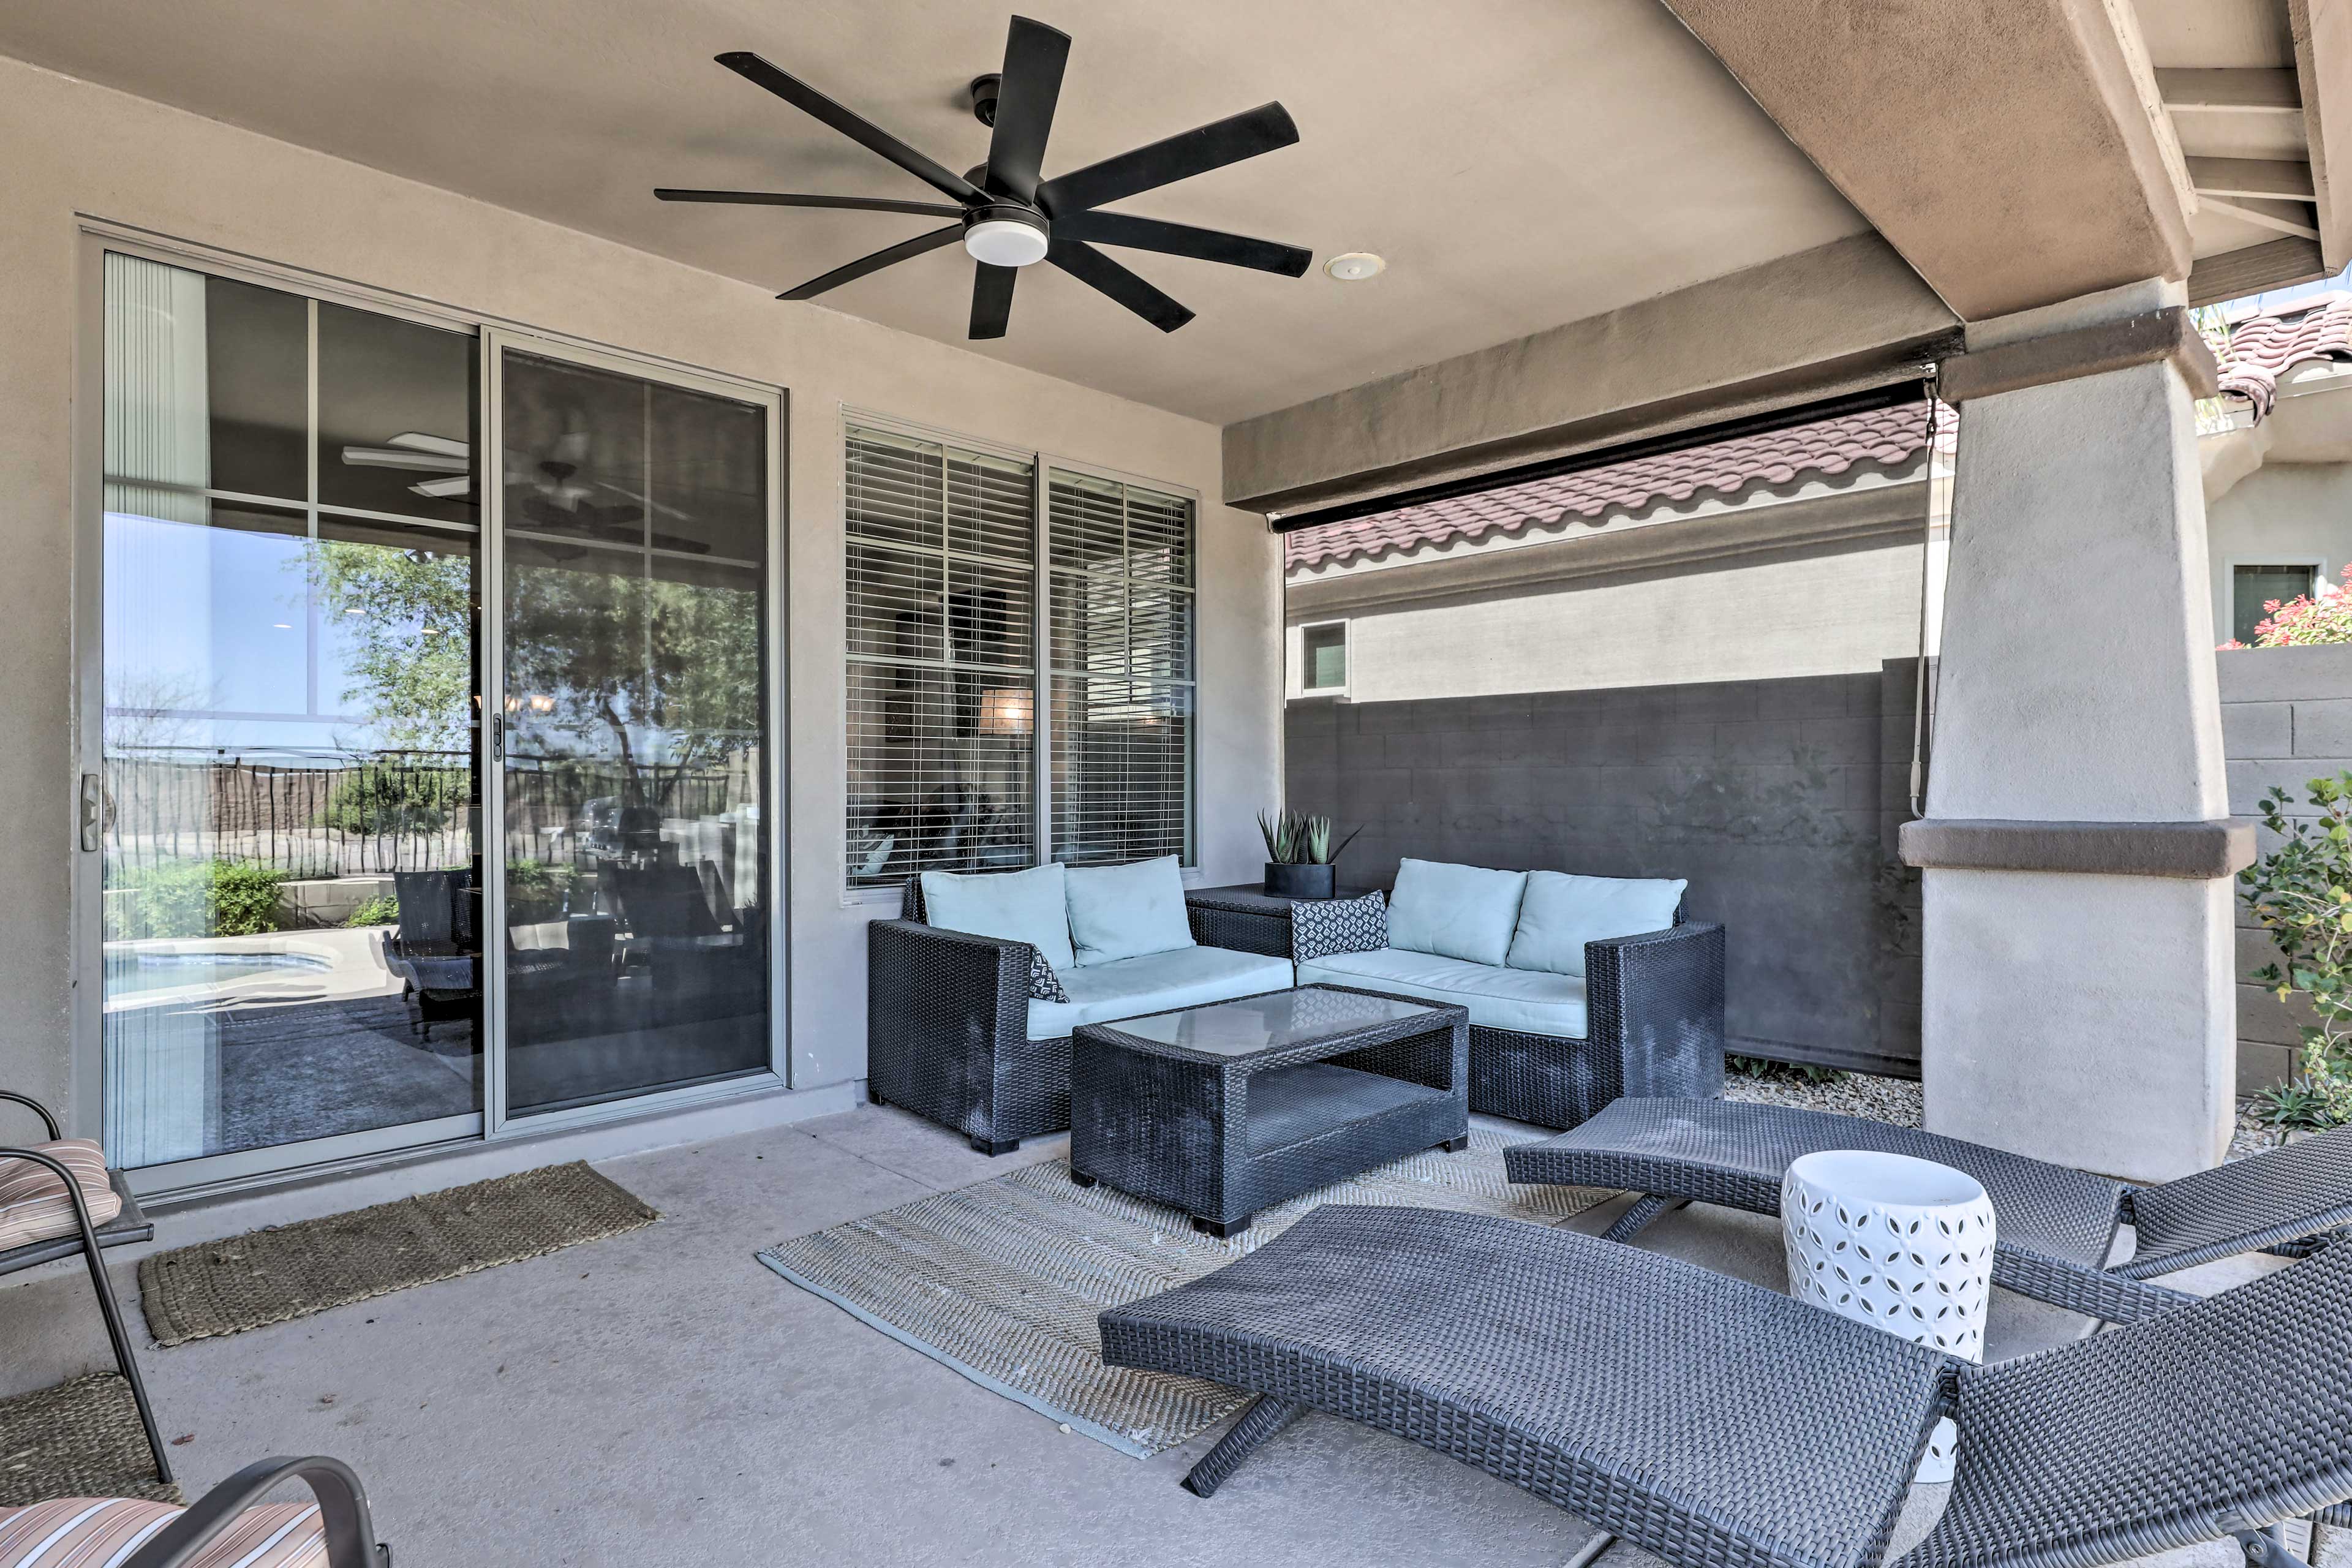 Patio Area | Outdoor Seating | Gas Grill